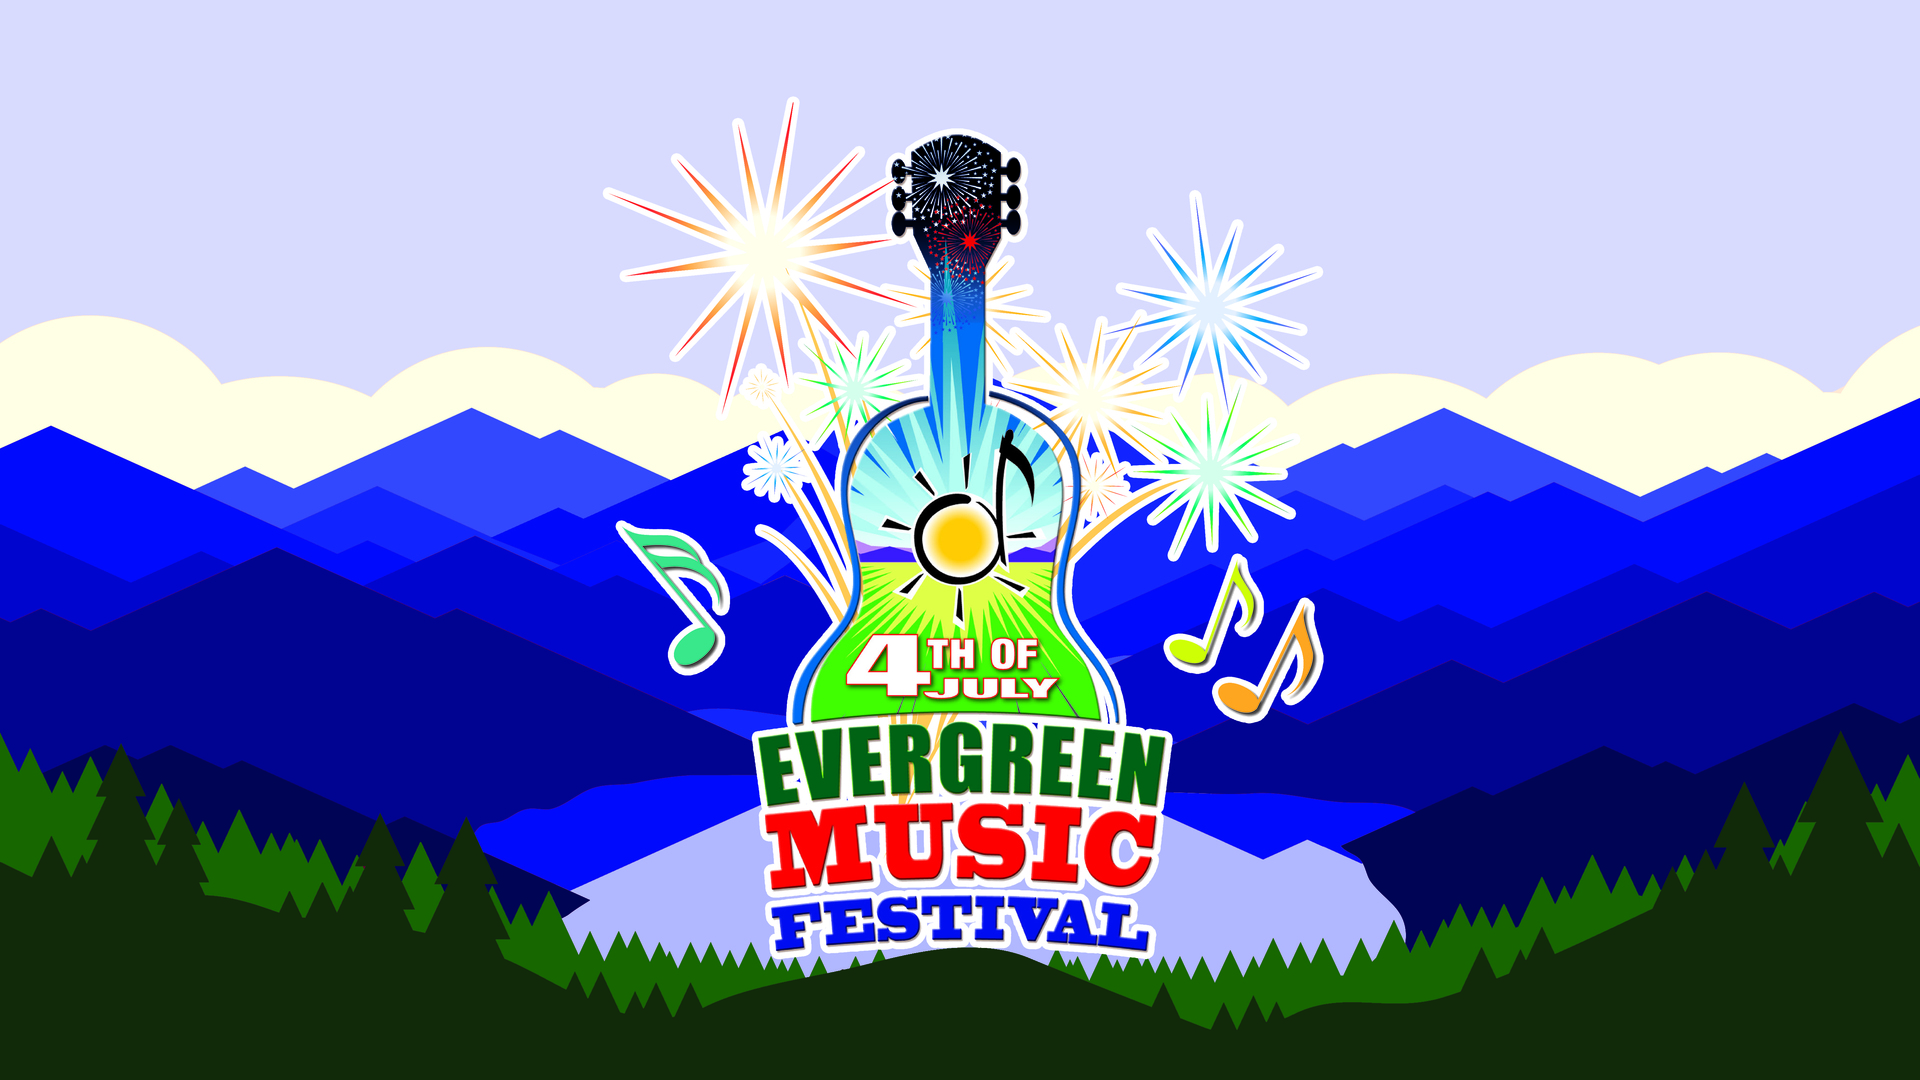 4th of July Evergreen Music Festival, Evergreen, Colorado, United States